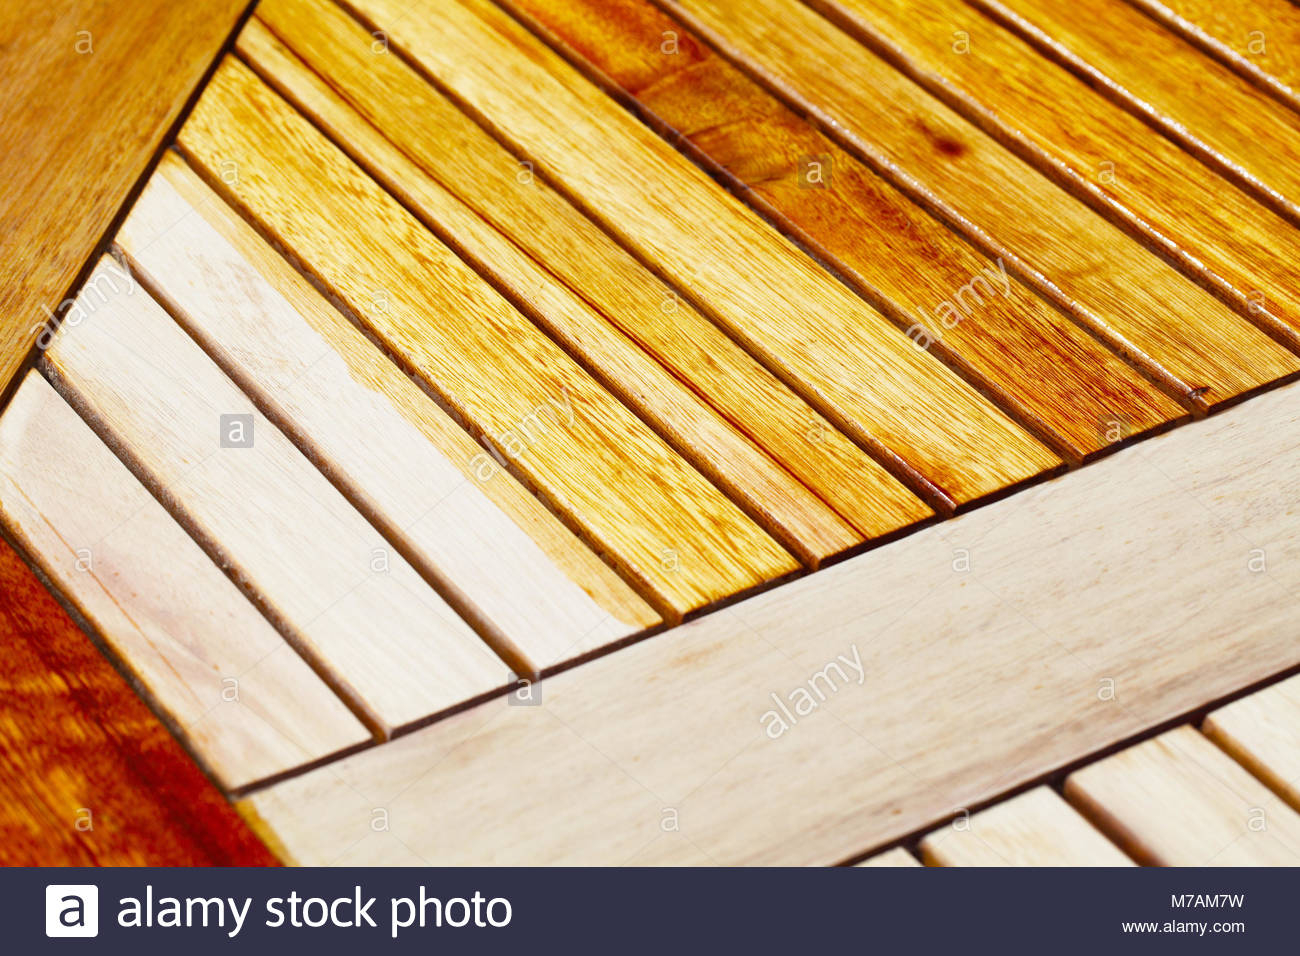 Applying Oil To Wooden Patio Furniture Stock Photo in dimensions 1300 X 956